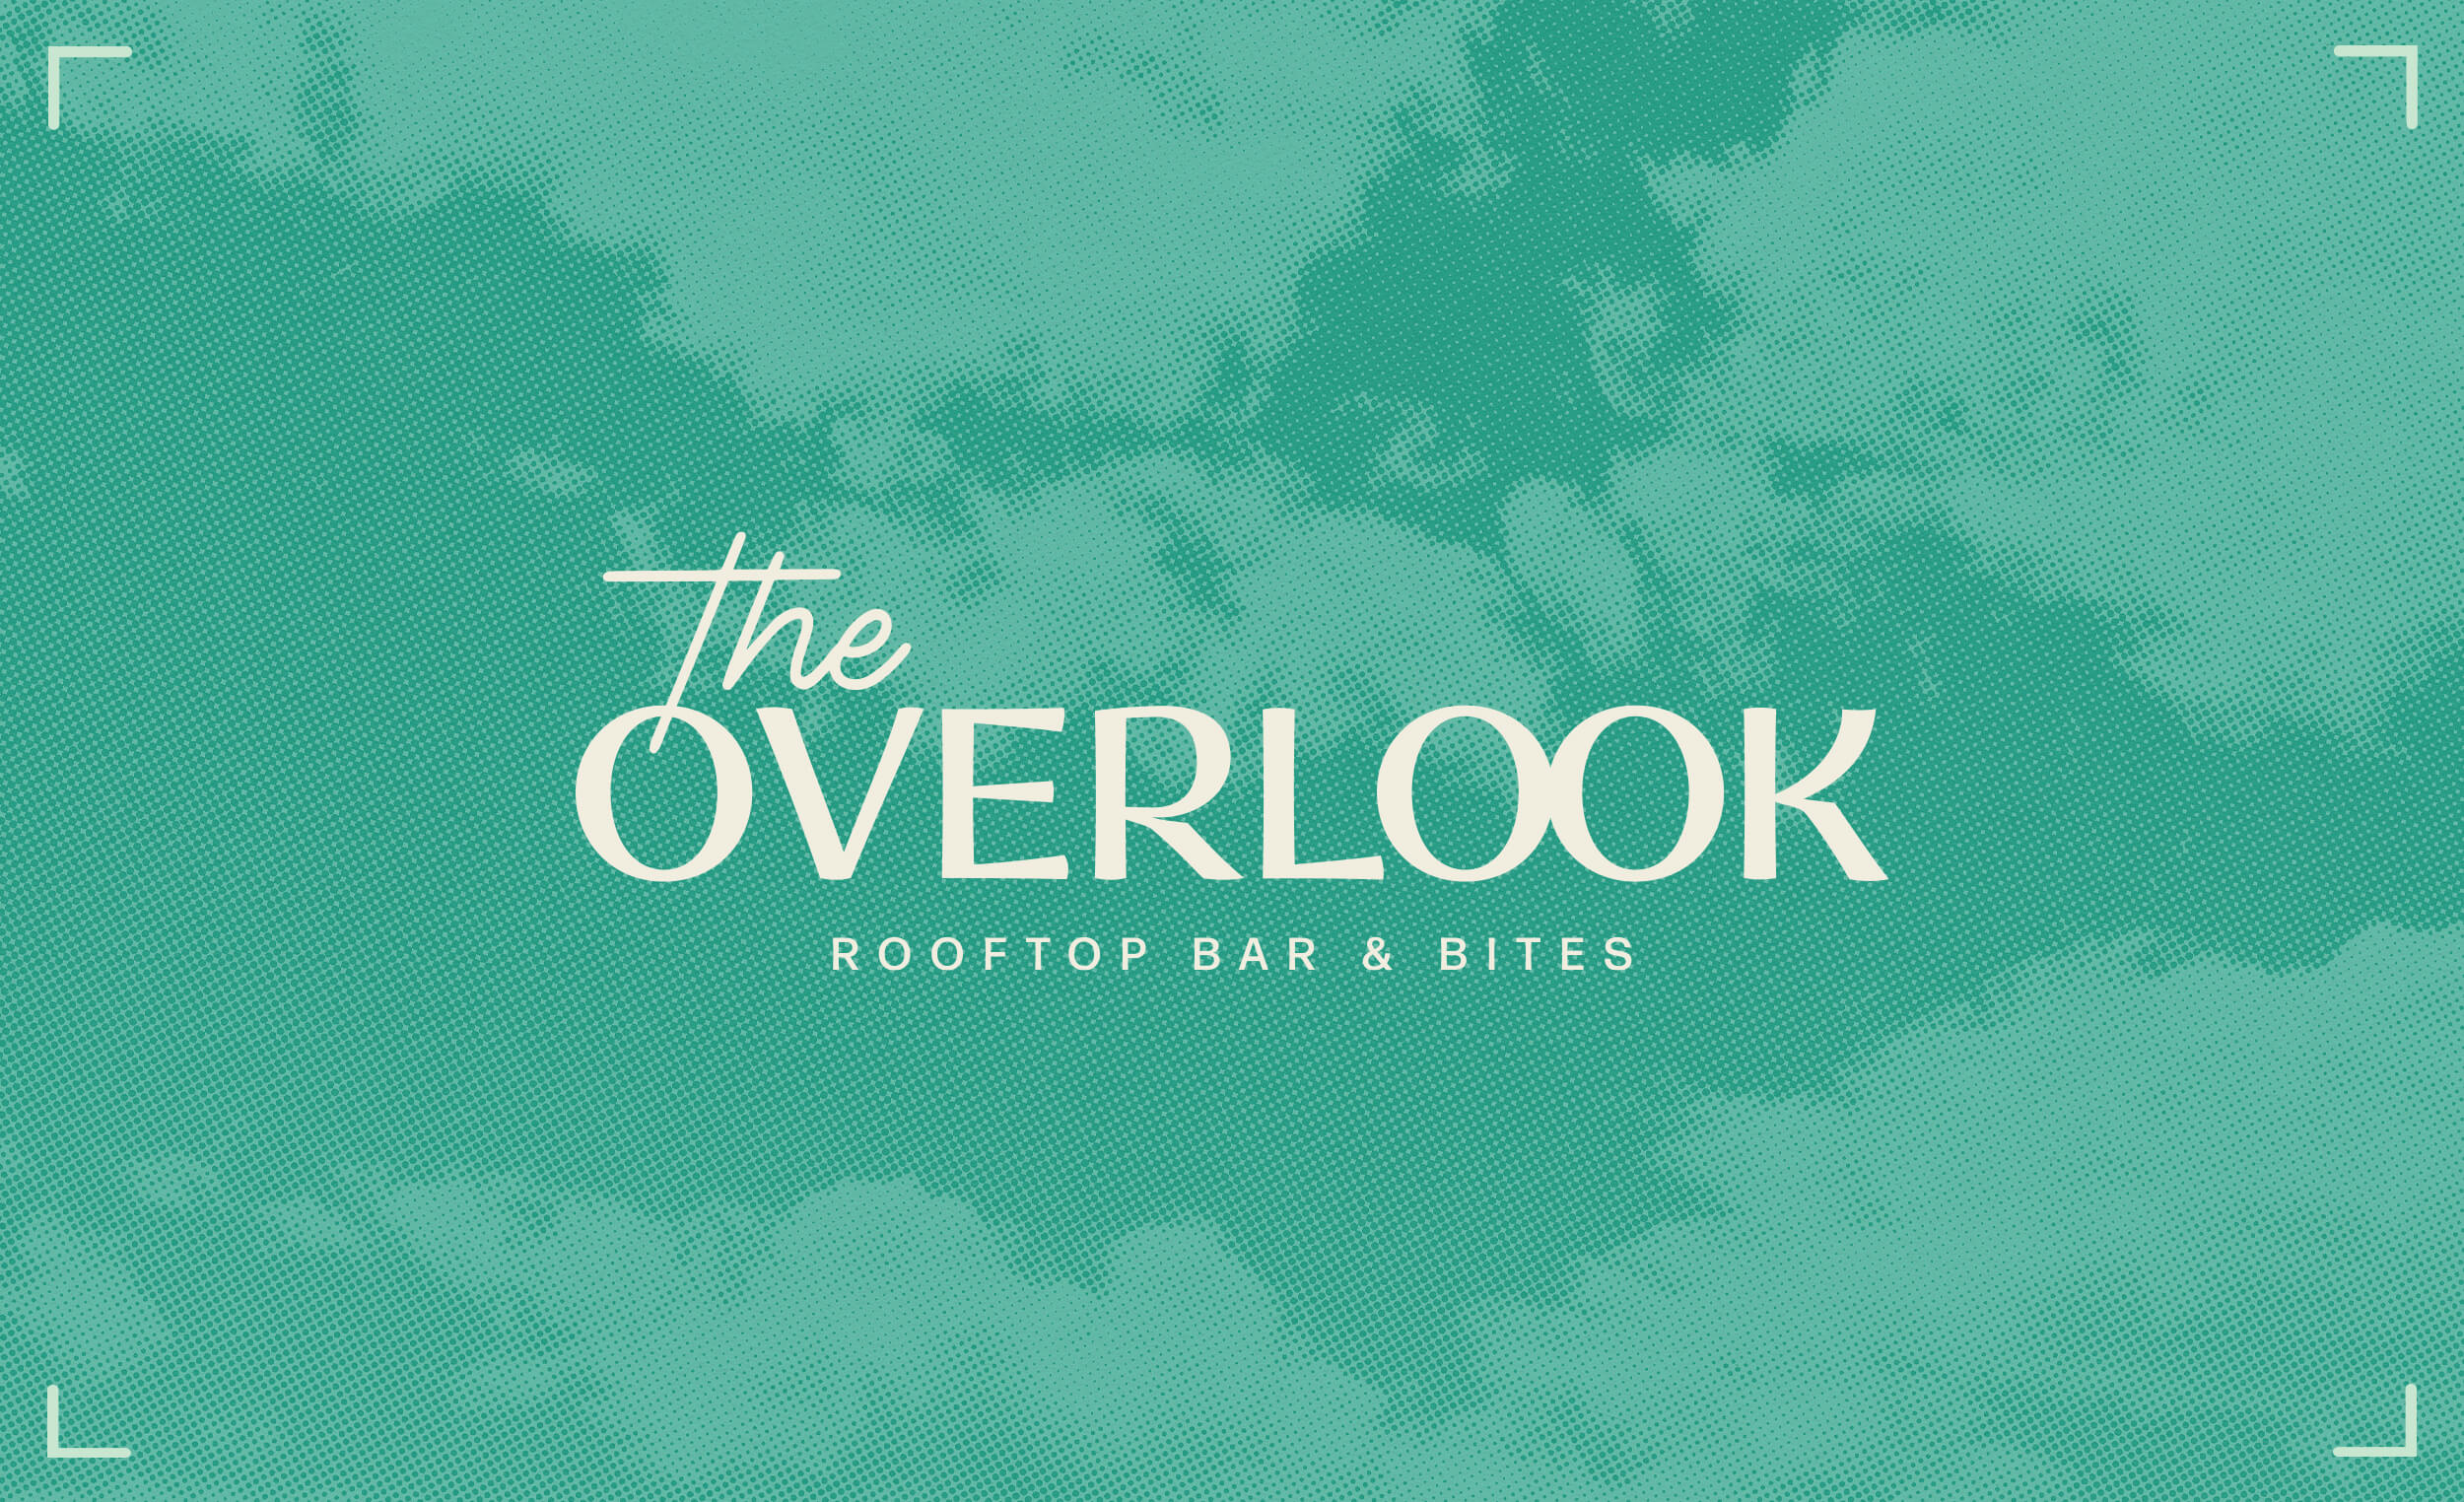 Halftone imagery of clouds with The Overlook logo in cream, with corner details